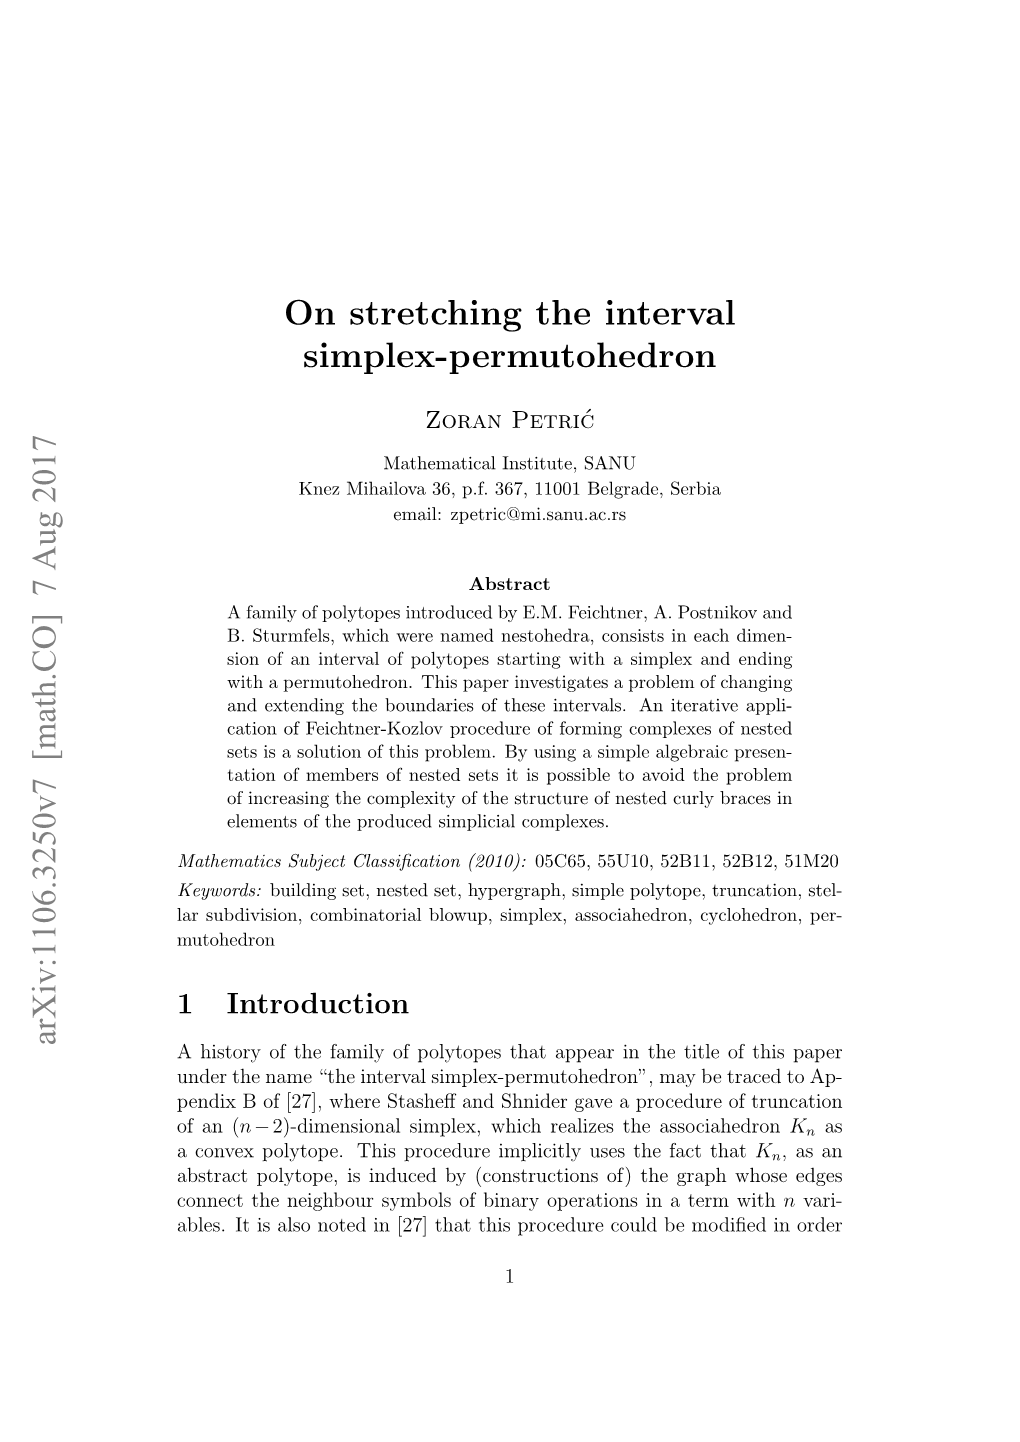 On Stretching the Interval Simplex-Permutohedron